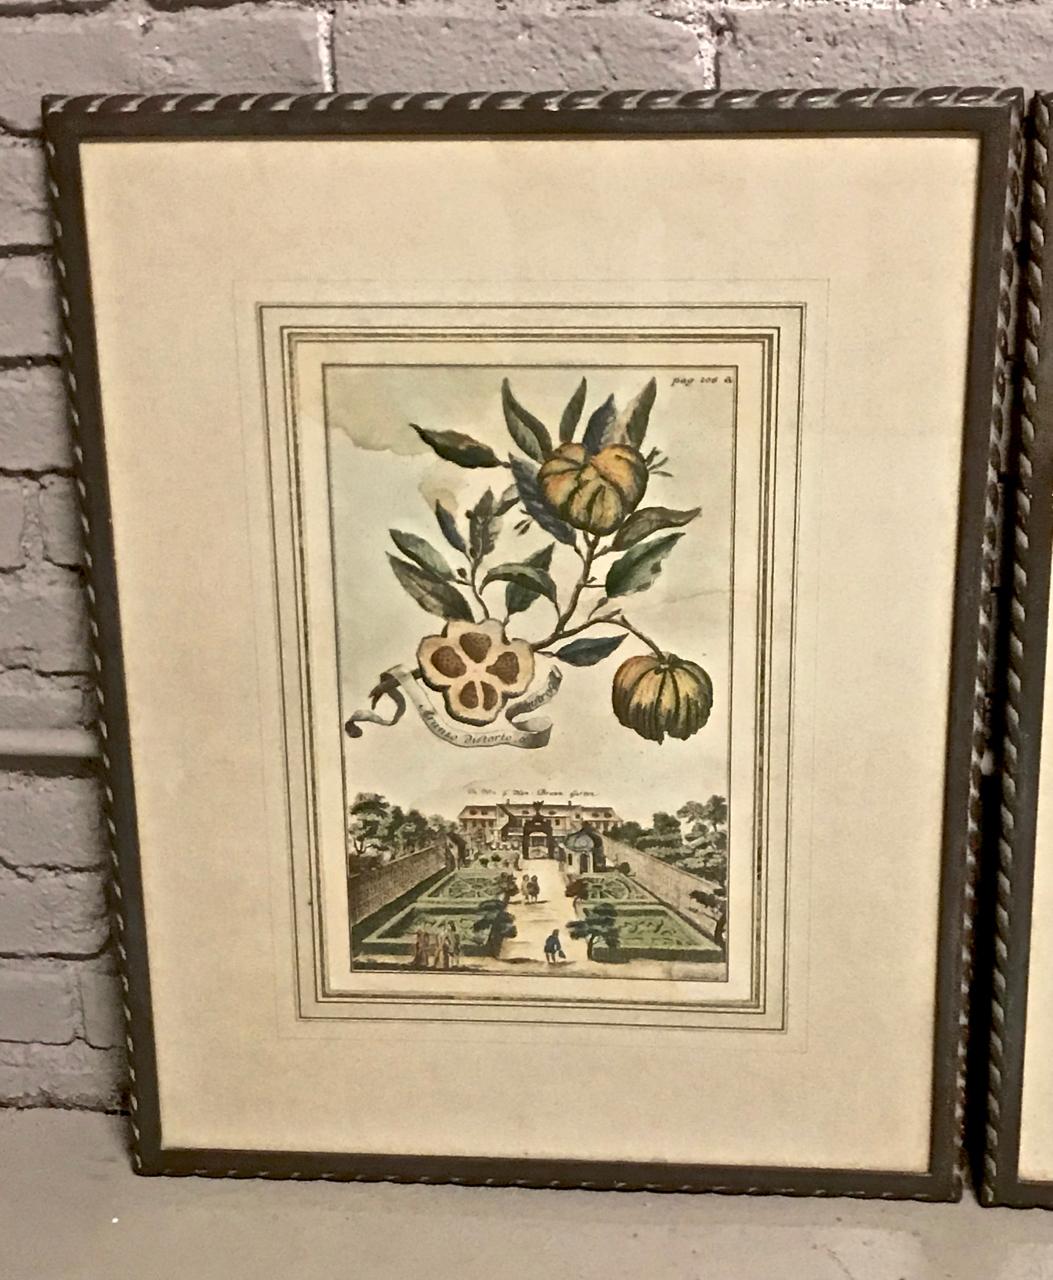 This is a wonderful pair of Volkamer early 18th century engravings of lemon trees and the spectacular gardens in which they were grown. The engravings retain their crisp hand-coloring with little fading. The folios are custom-framed and beautifully